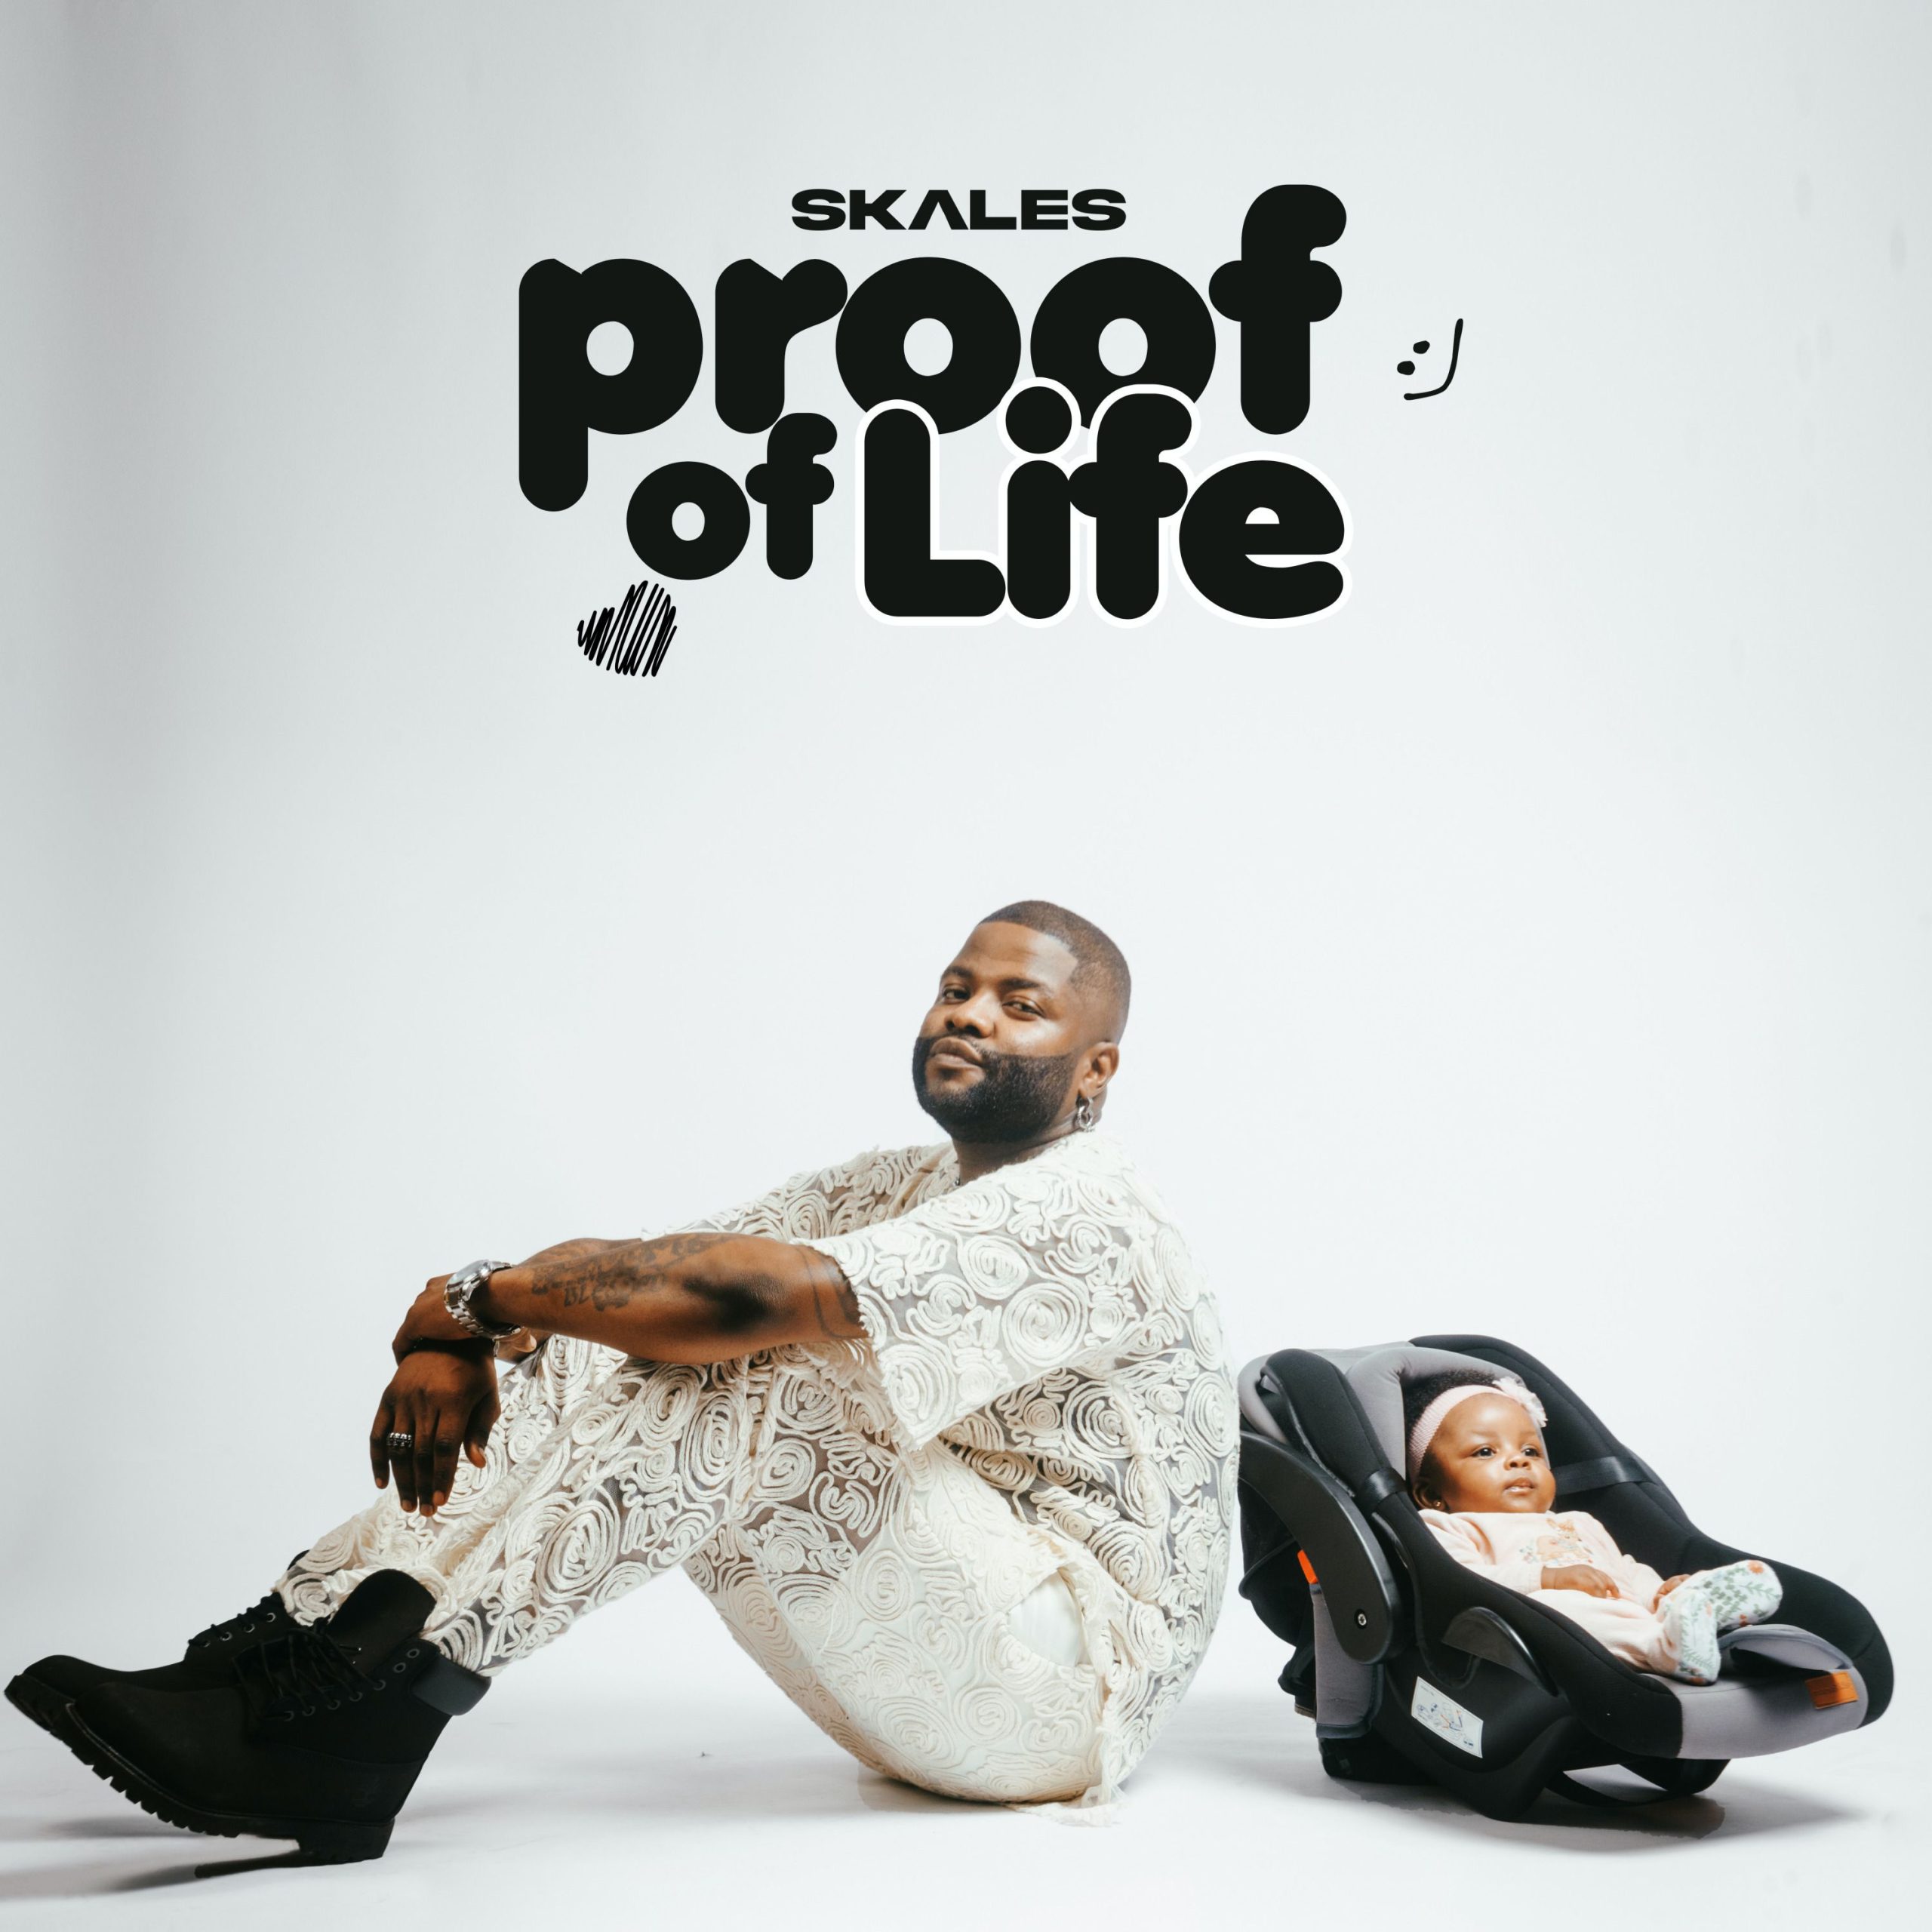 Skales Dont Say Much scaled